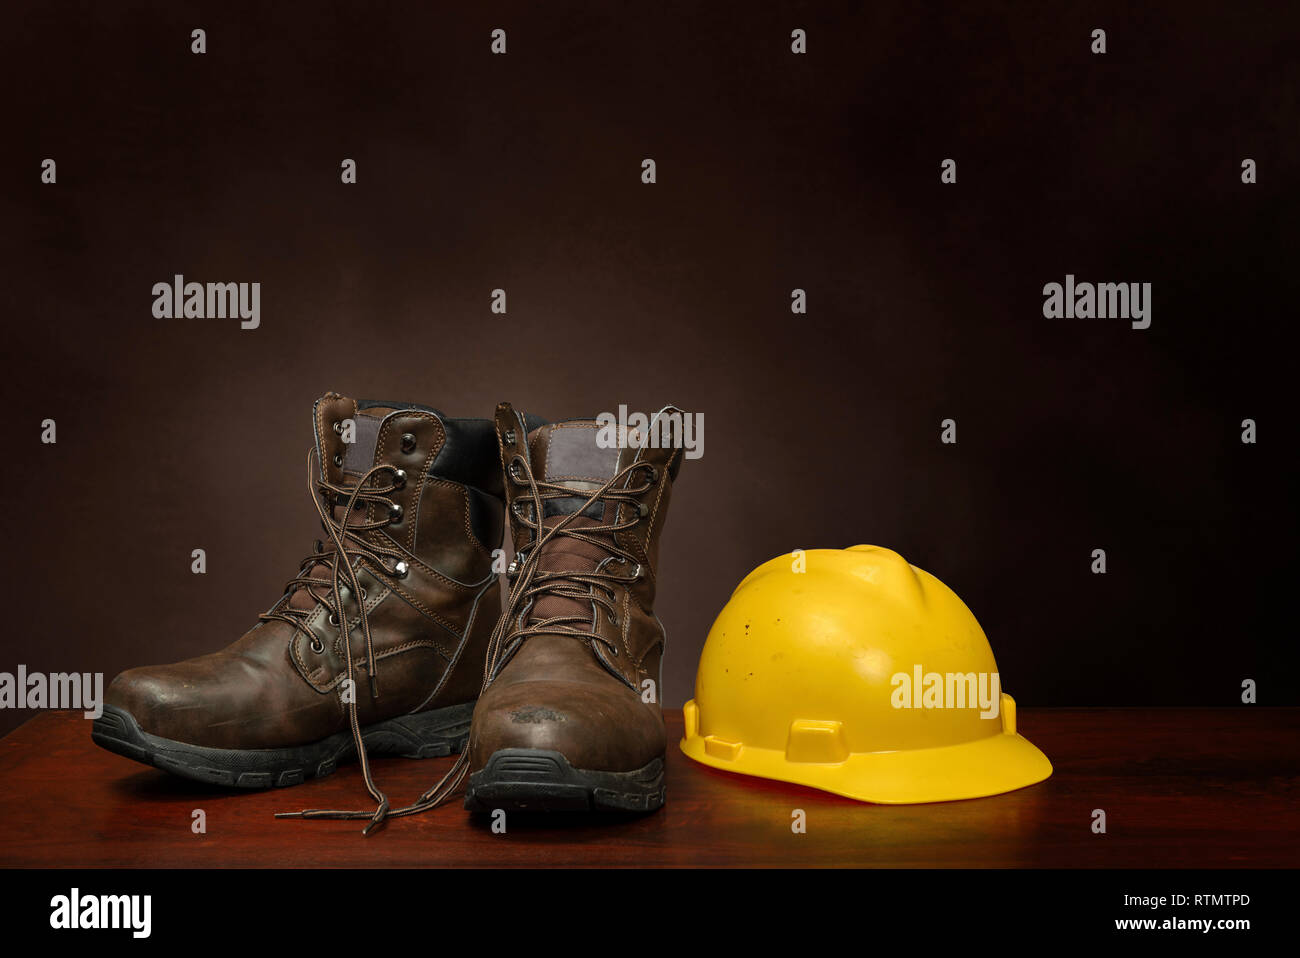 Horizontal shot of a pair of brown work boots and yellow construction helmet on a brown background with copy space. Stock Photo